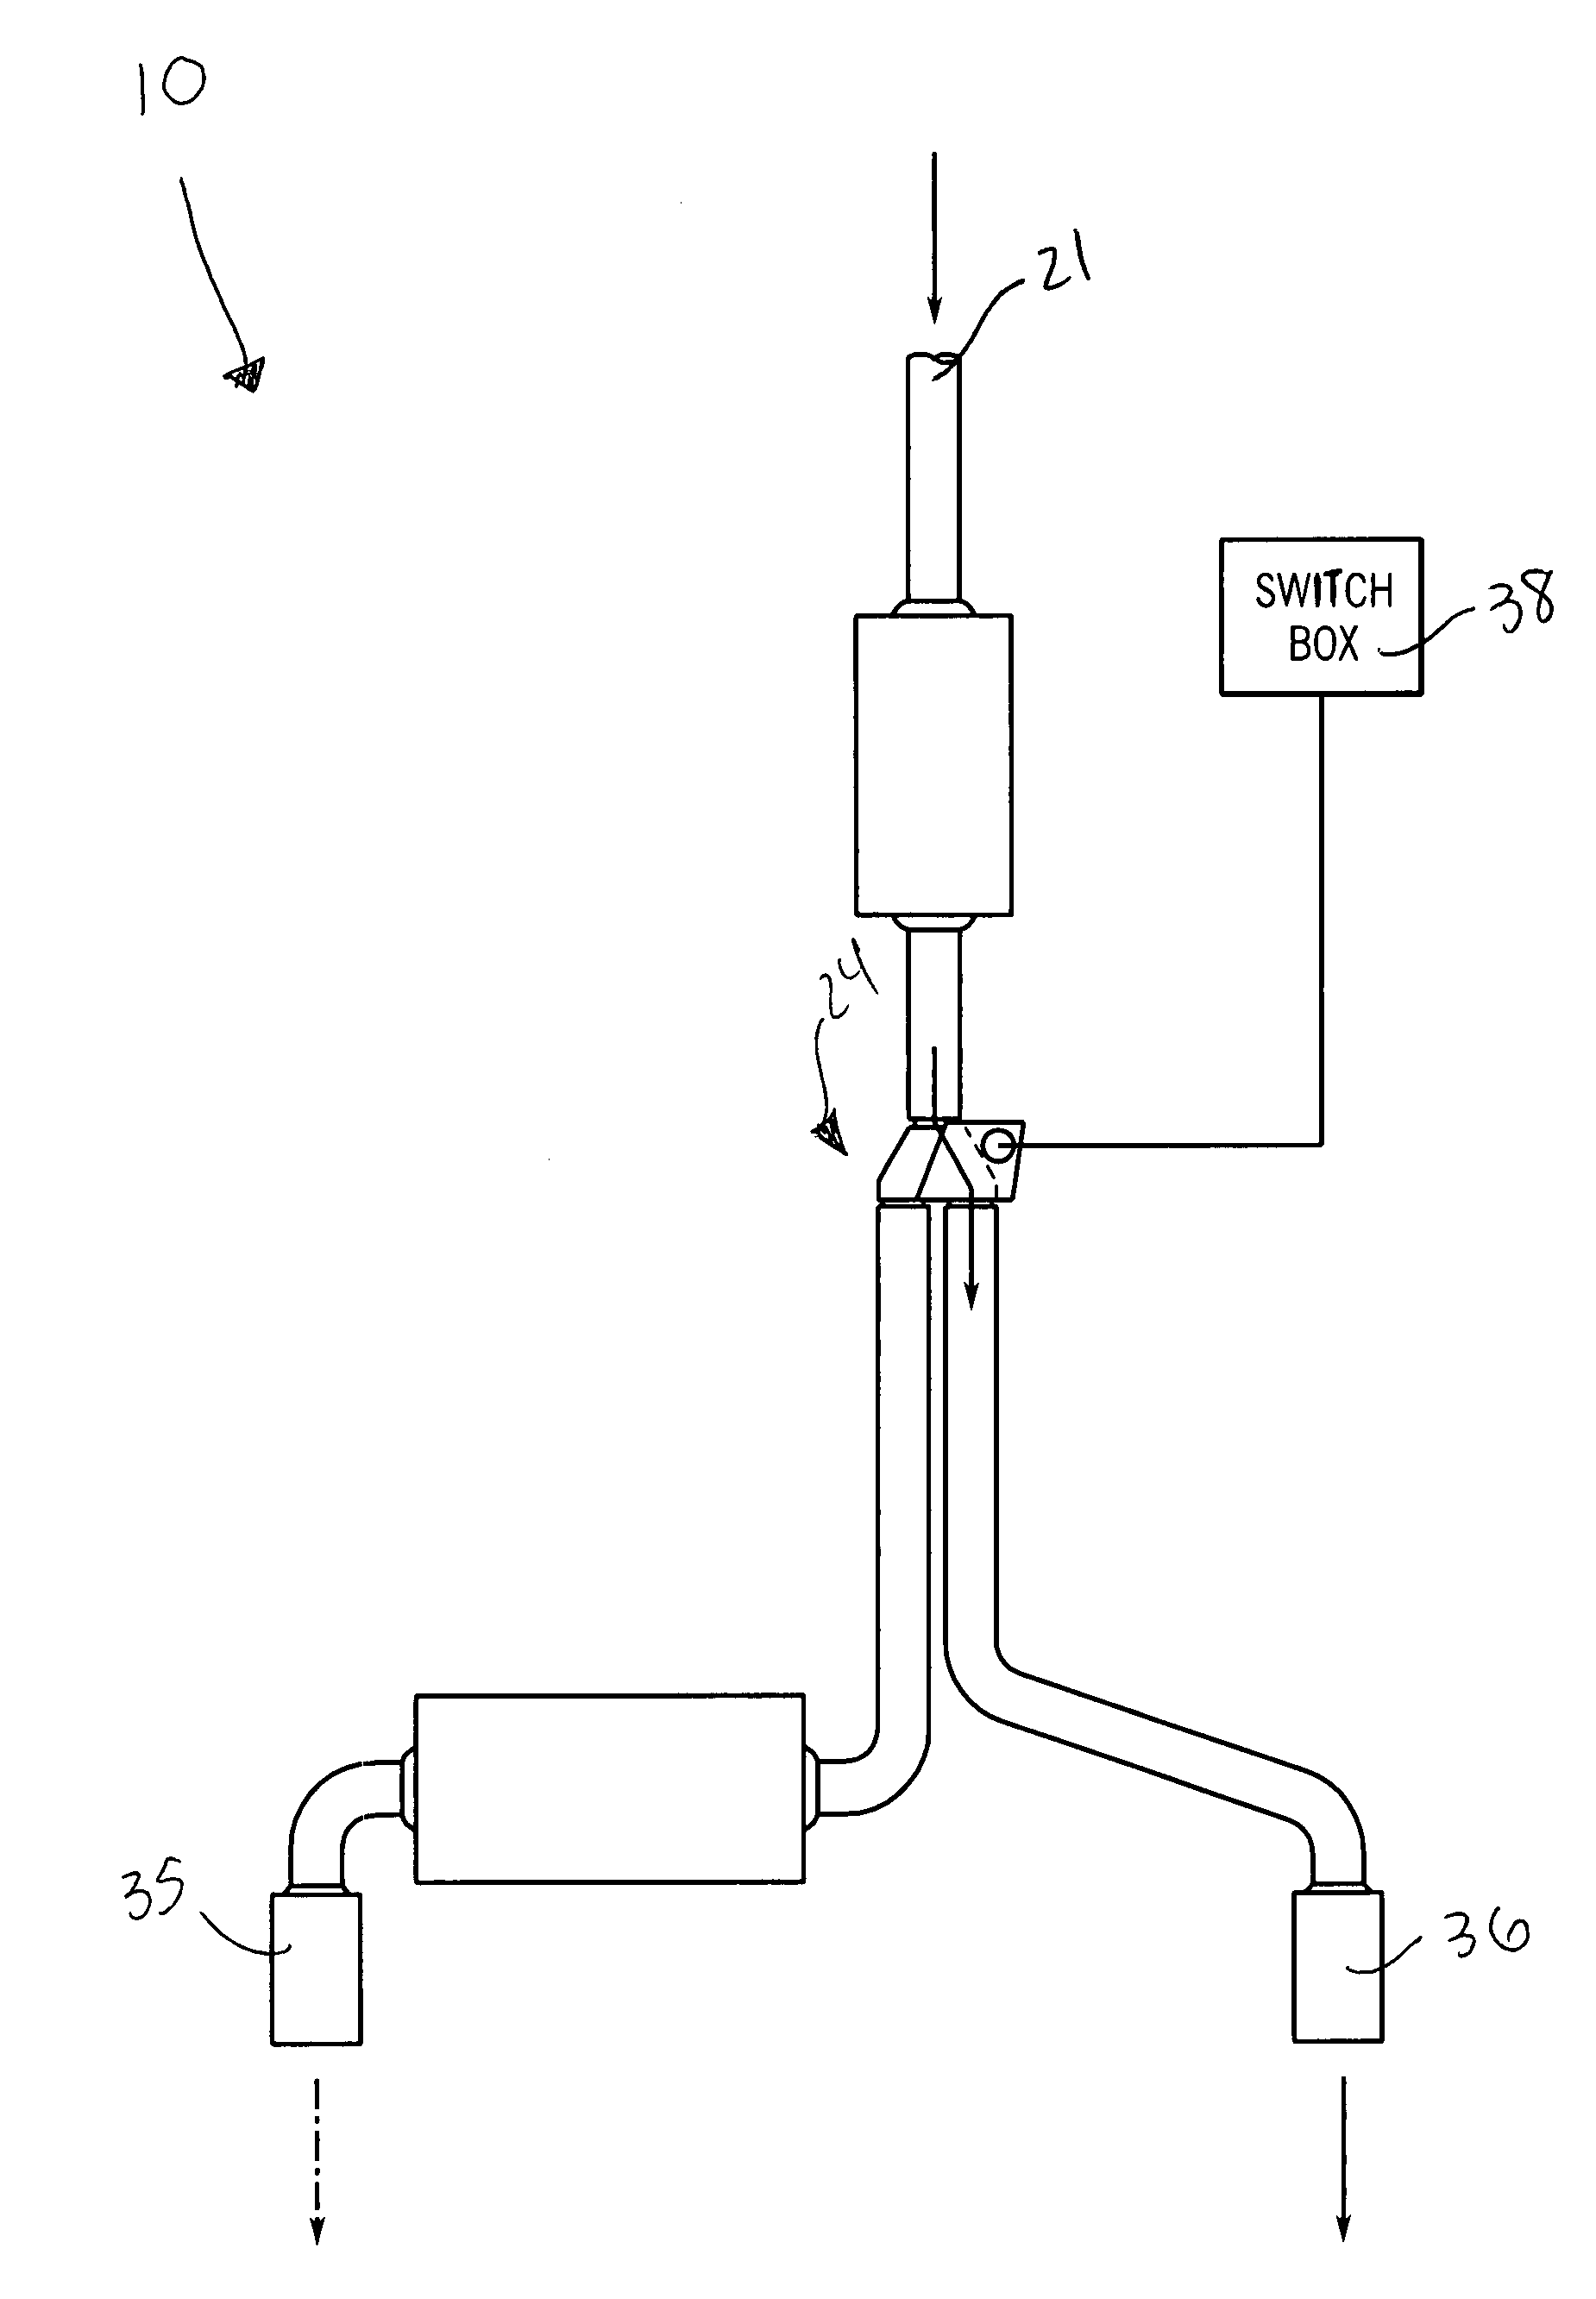 Dual mode vehicle exhaust system and associated method